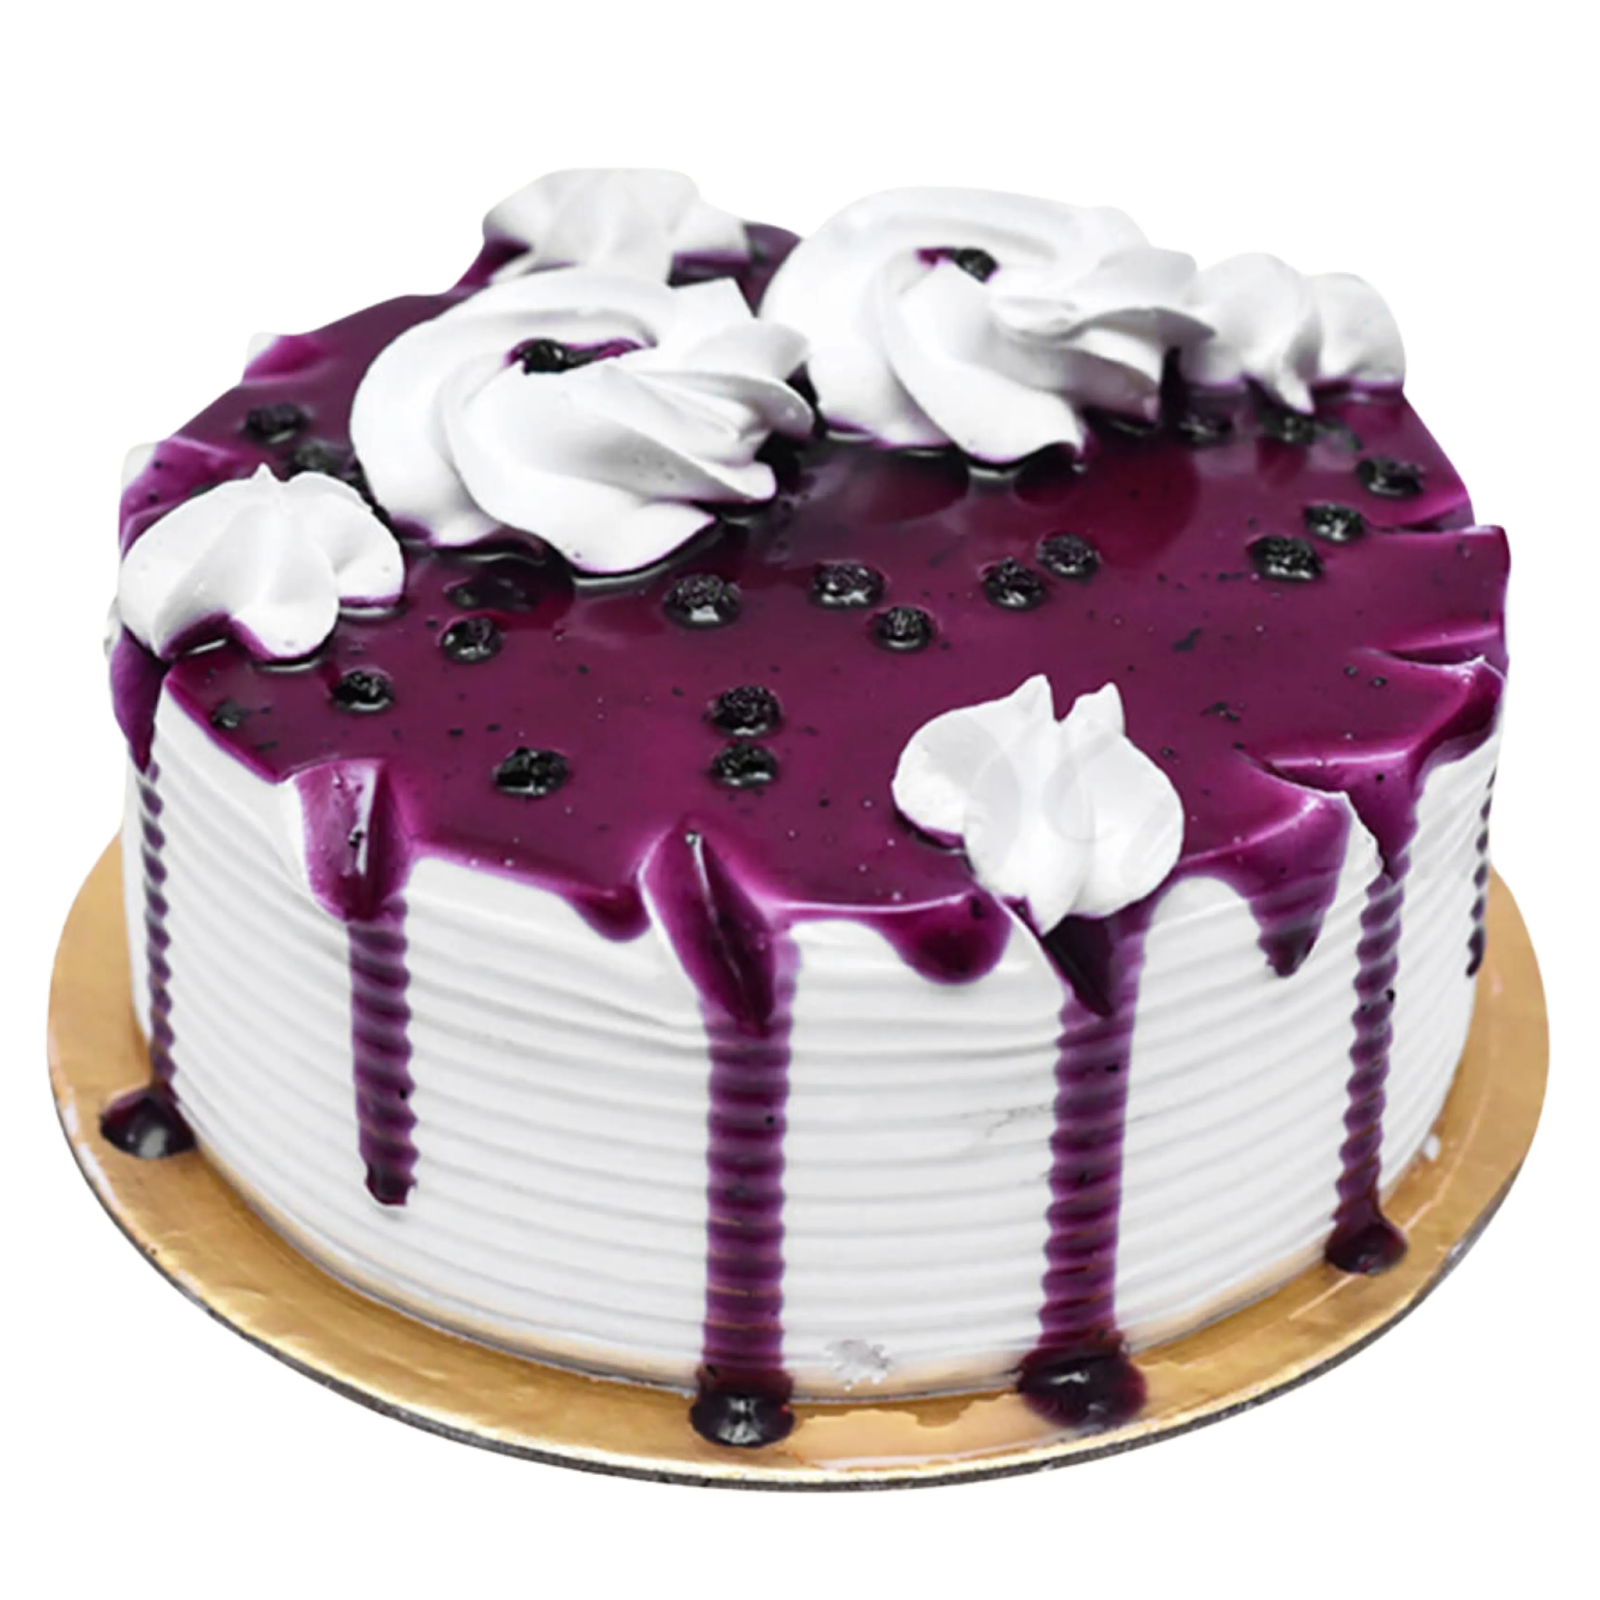 Imported Berry Flavoured Cake by Belly Amy's